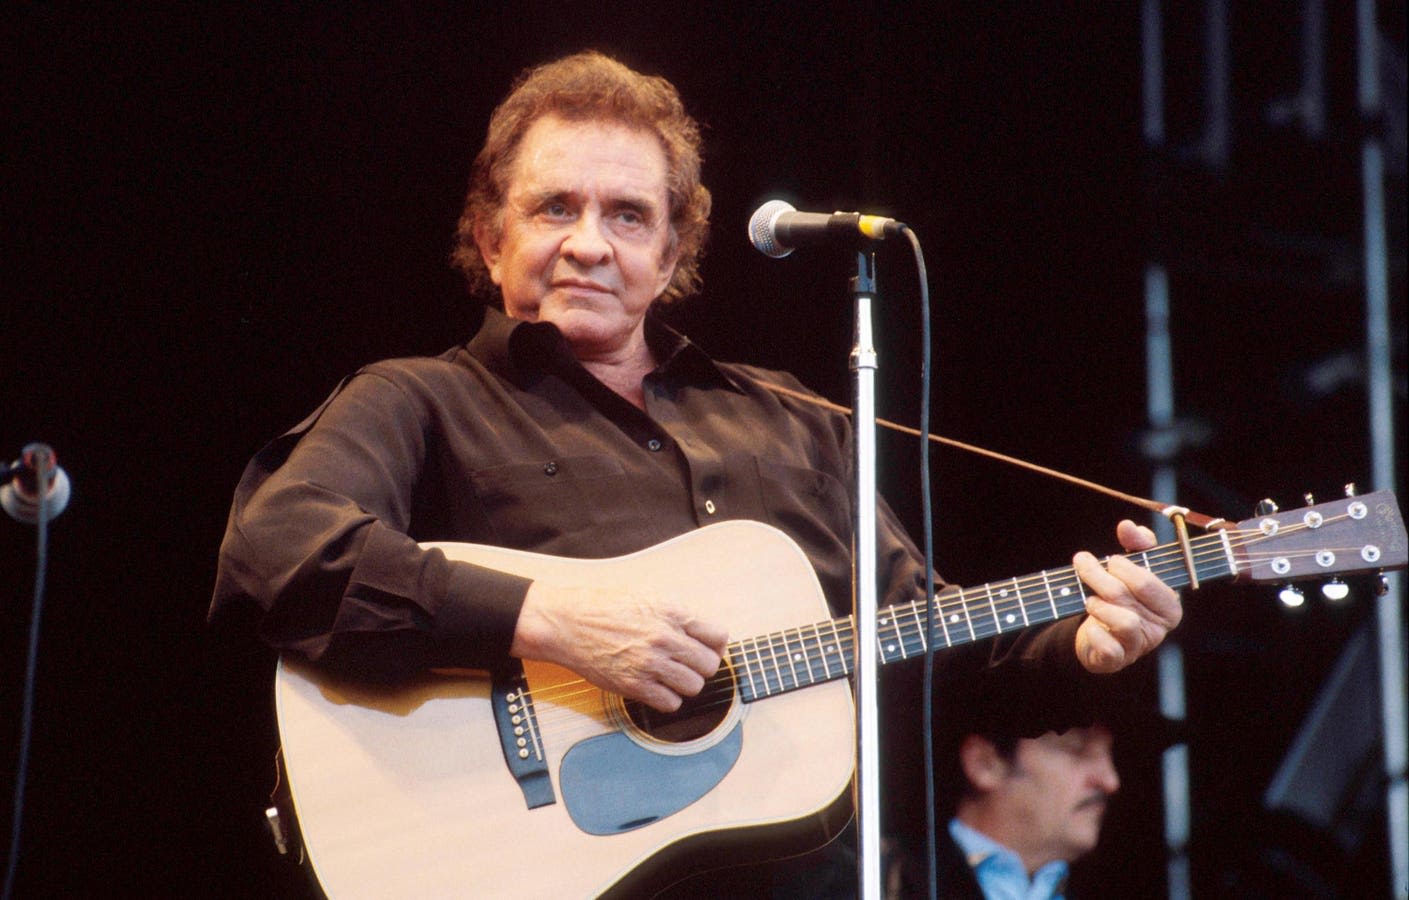 Johnny Cash’s Nearly-Forgotten Song’s Sales Grow By More Than 18,000%